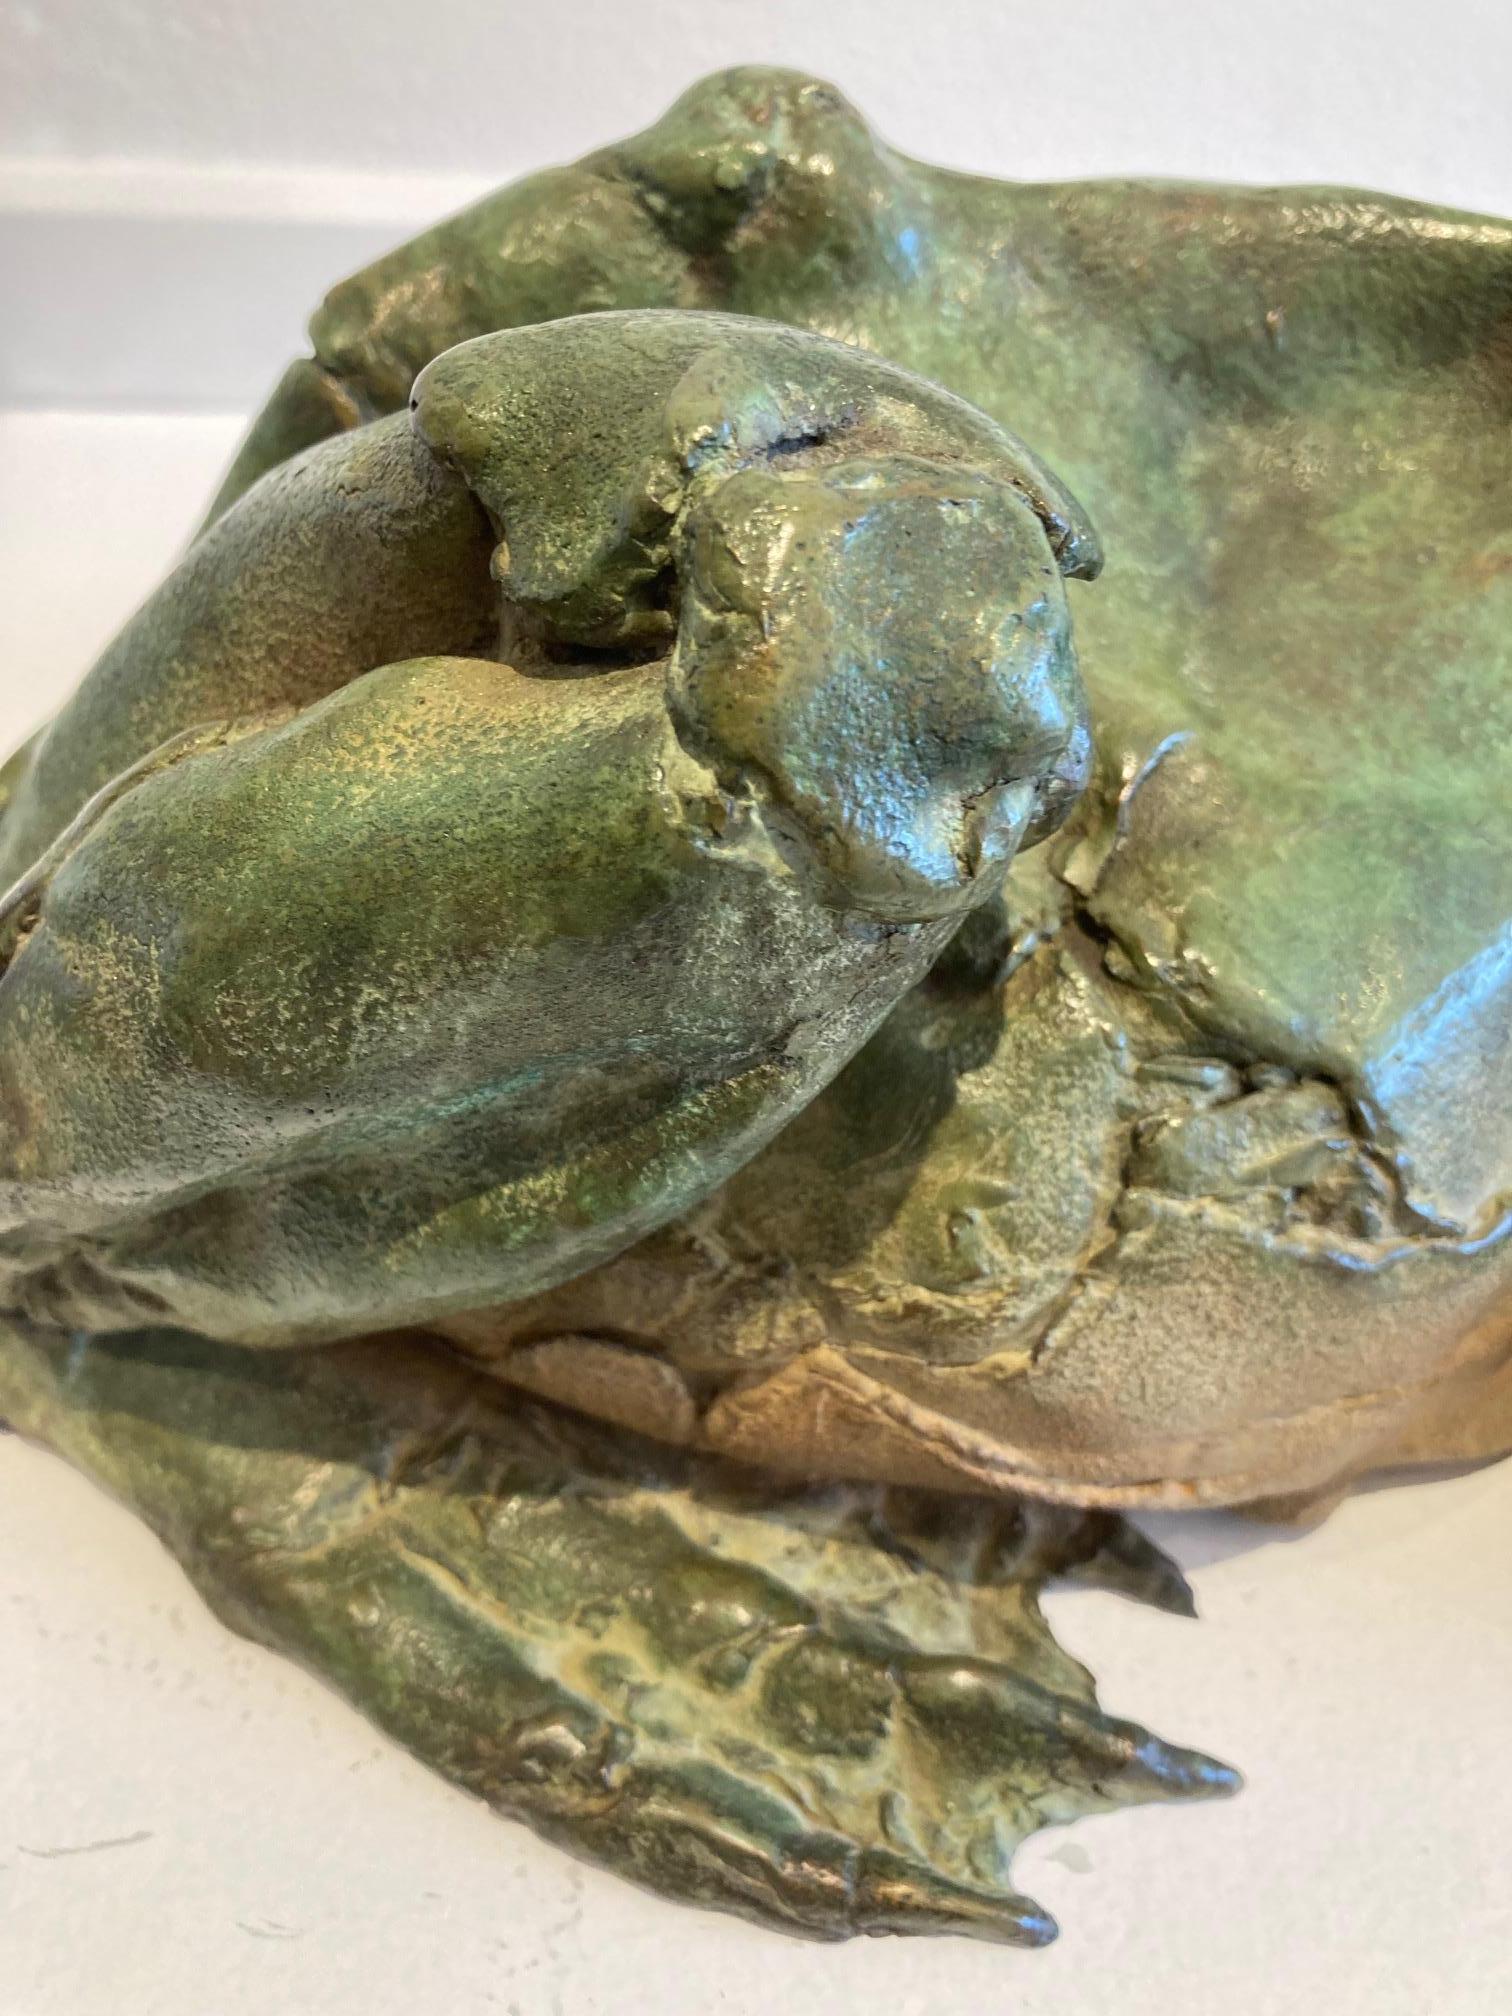 Sleeping Frog Bronze Sculpture Animal Green Patina Outside Realism In Stock

Pieter Vanden Daele was born in Belgium in 1971. He grew up between lakes and the river Scheldt. The river De Scheldt and the variety of lakes are an ideal environment for